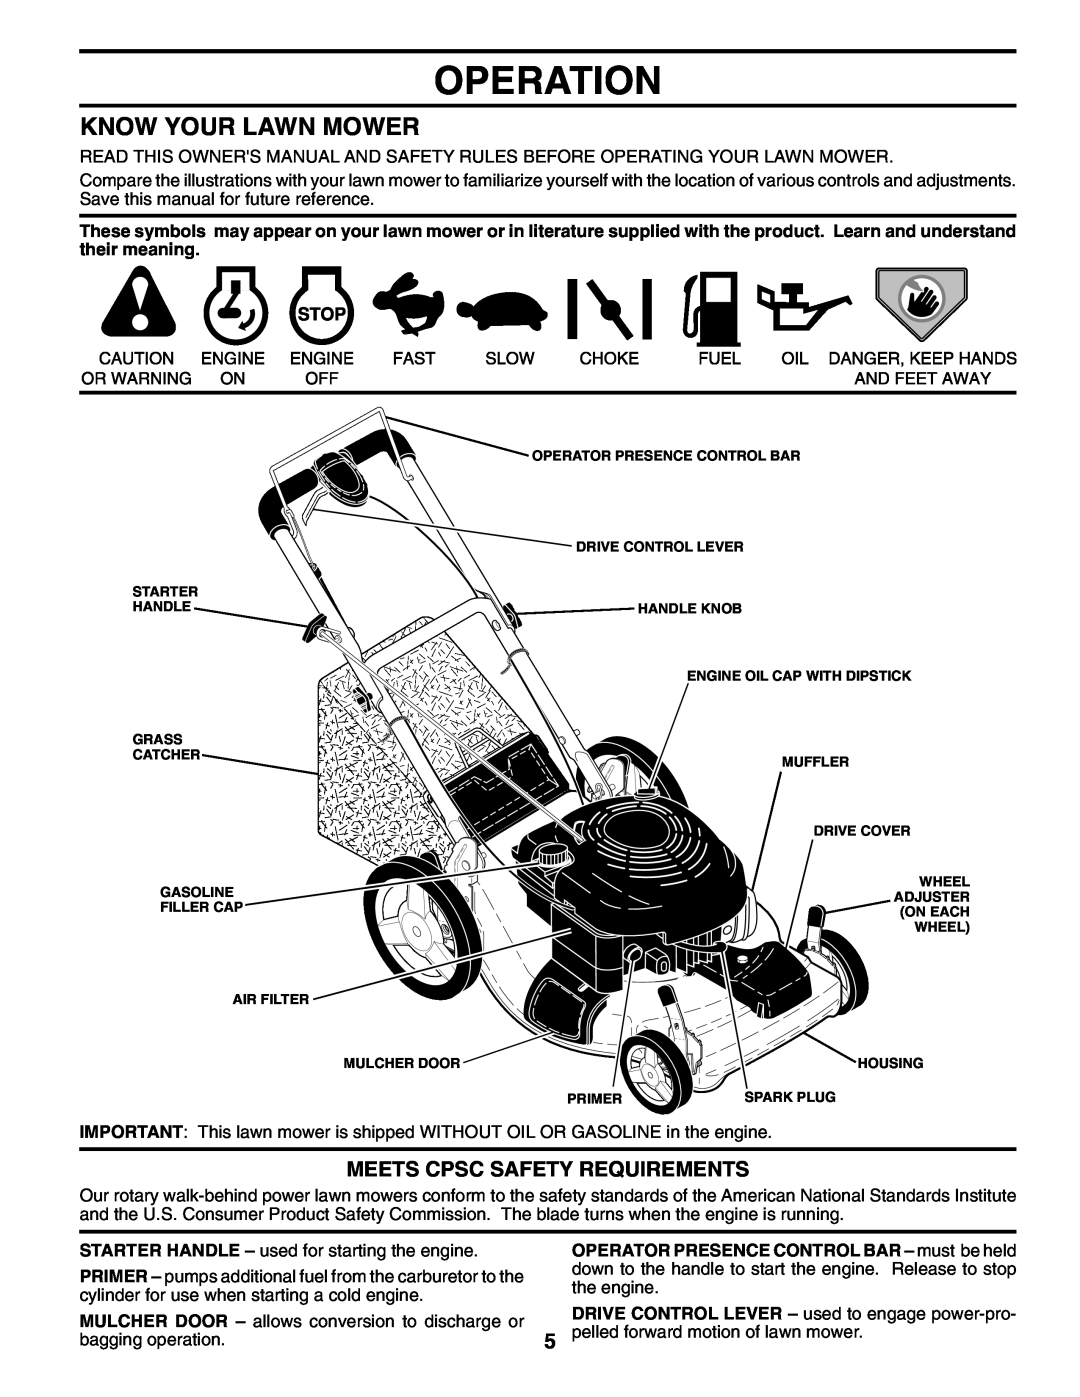 Husqvarna 62522SH owner manual Operation, Know Your Lawn Mower, Meets Cpsc Safety Requirements 